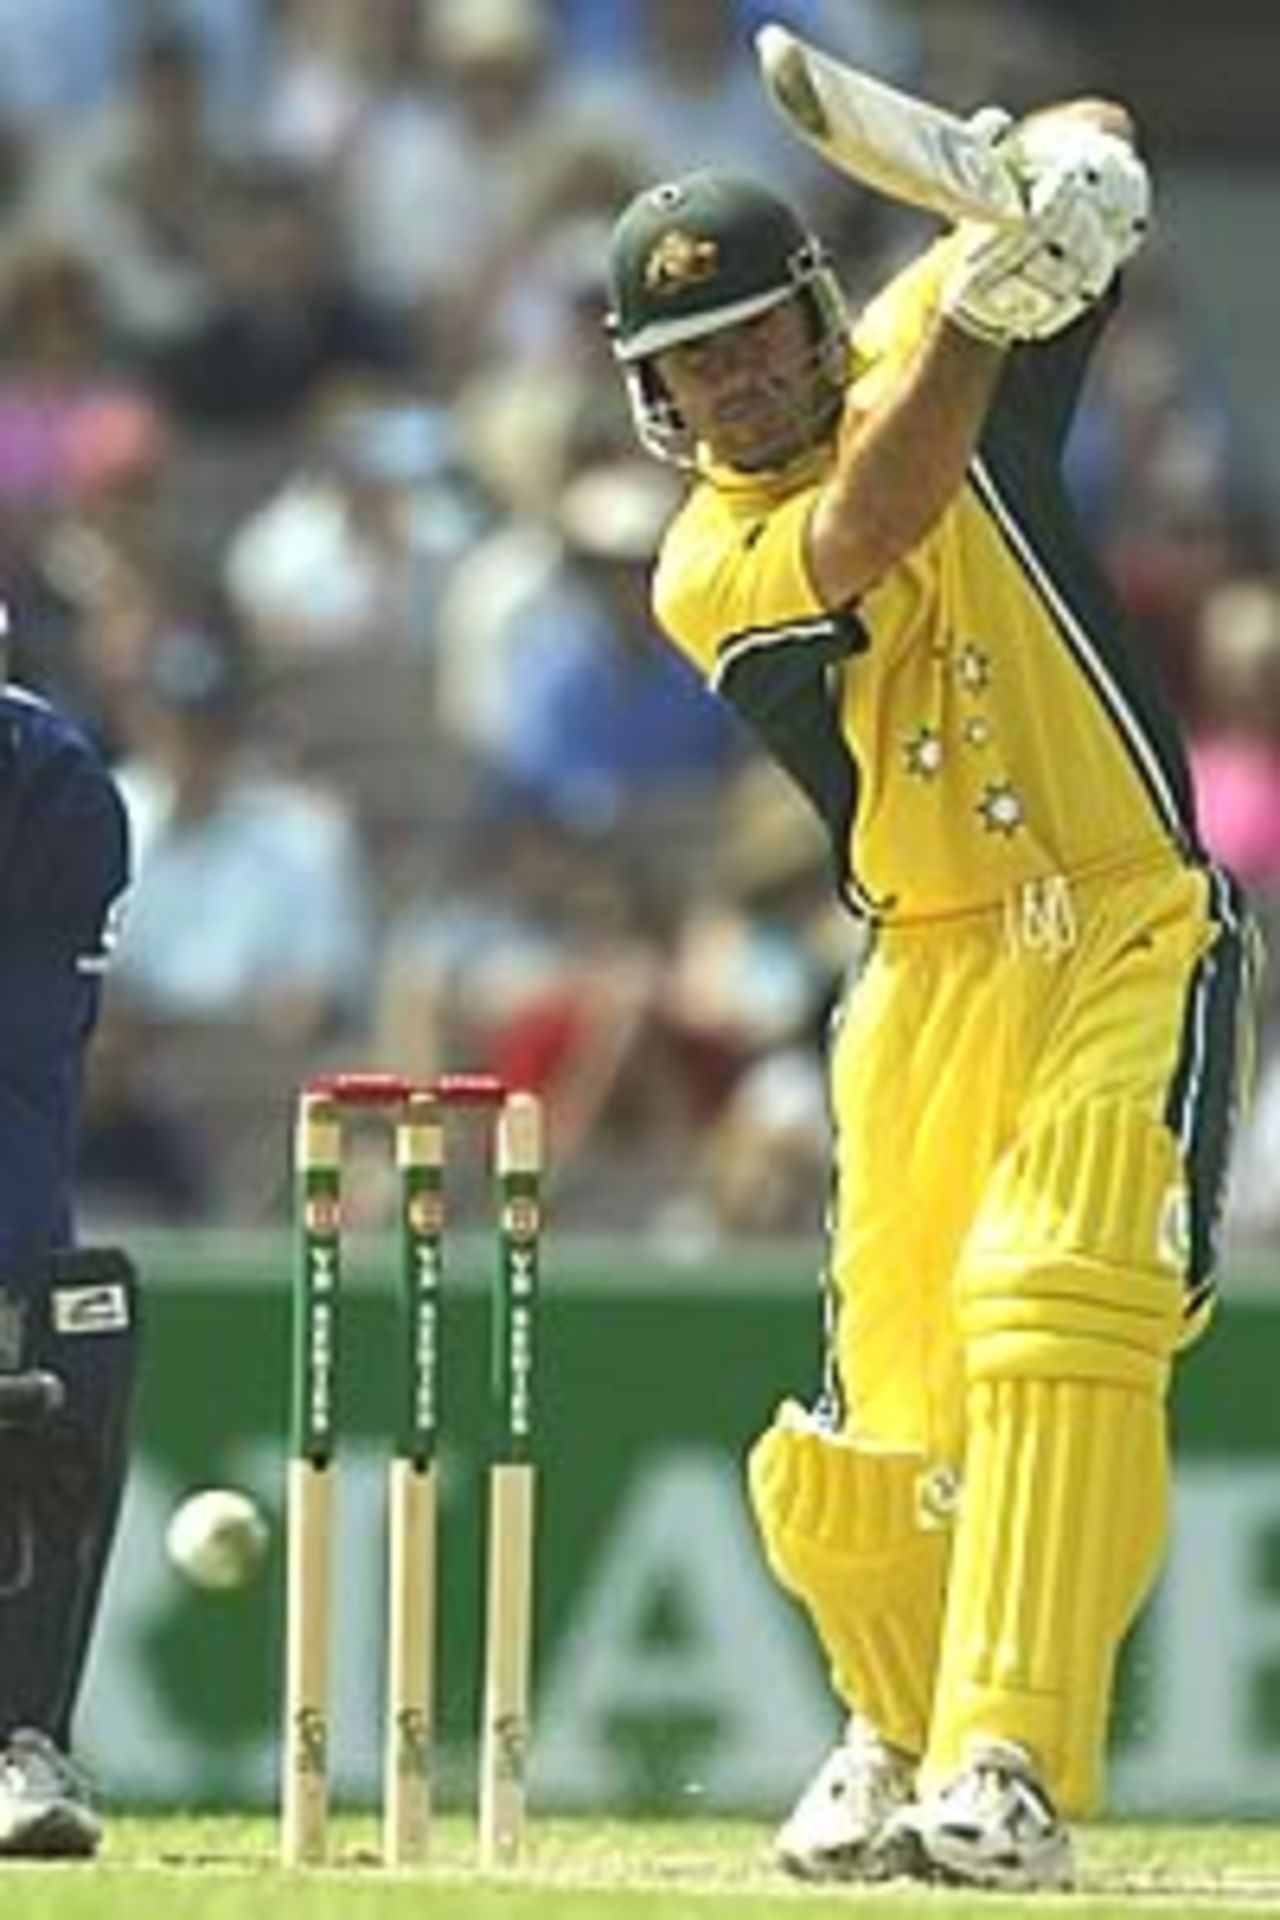 MELBOURNE - DECEMBER 15: Ricky Ponting of Australia hits out during the One Day International match between Australia and England at the Melbourne Cricket Ground in Melbourne, Australia on December 15, 2002.